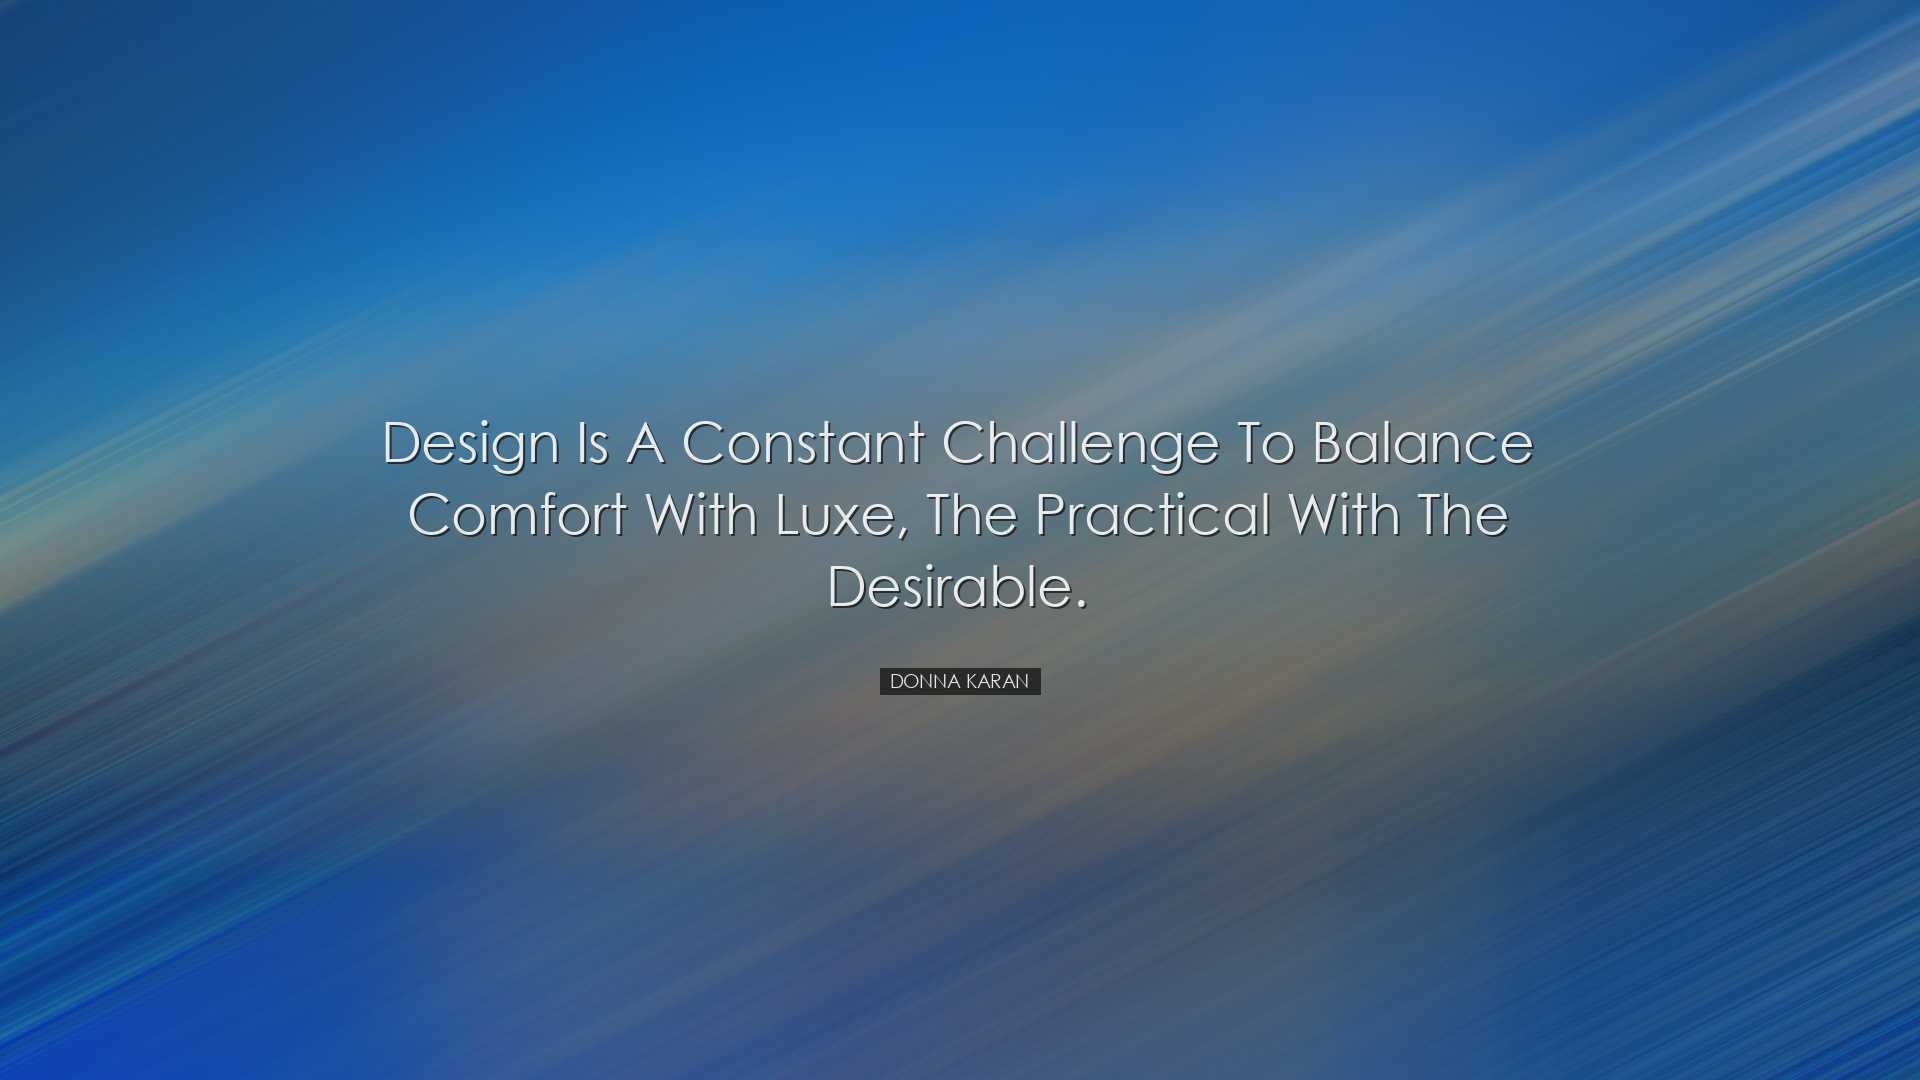 Design is a constant challenge to balance comfort with luxe, the p